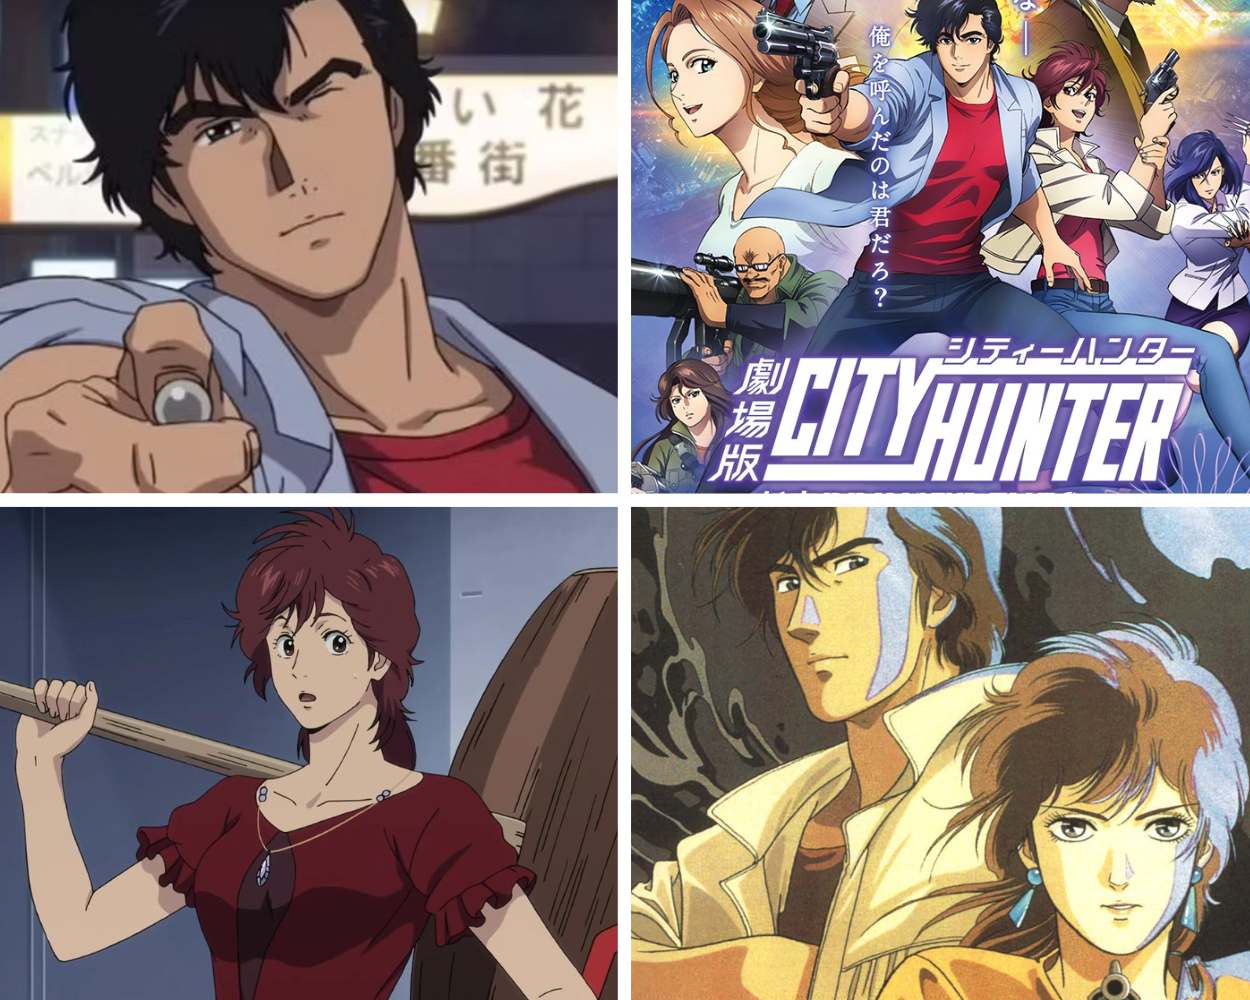 City Hunter - Anime From The 1980s